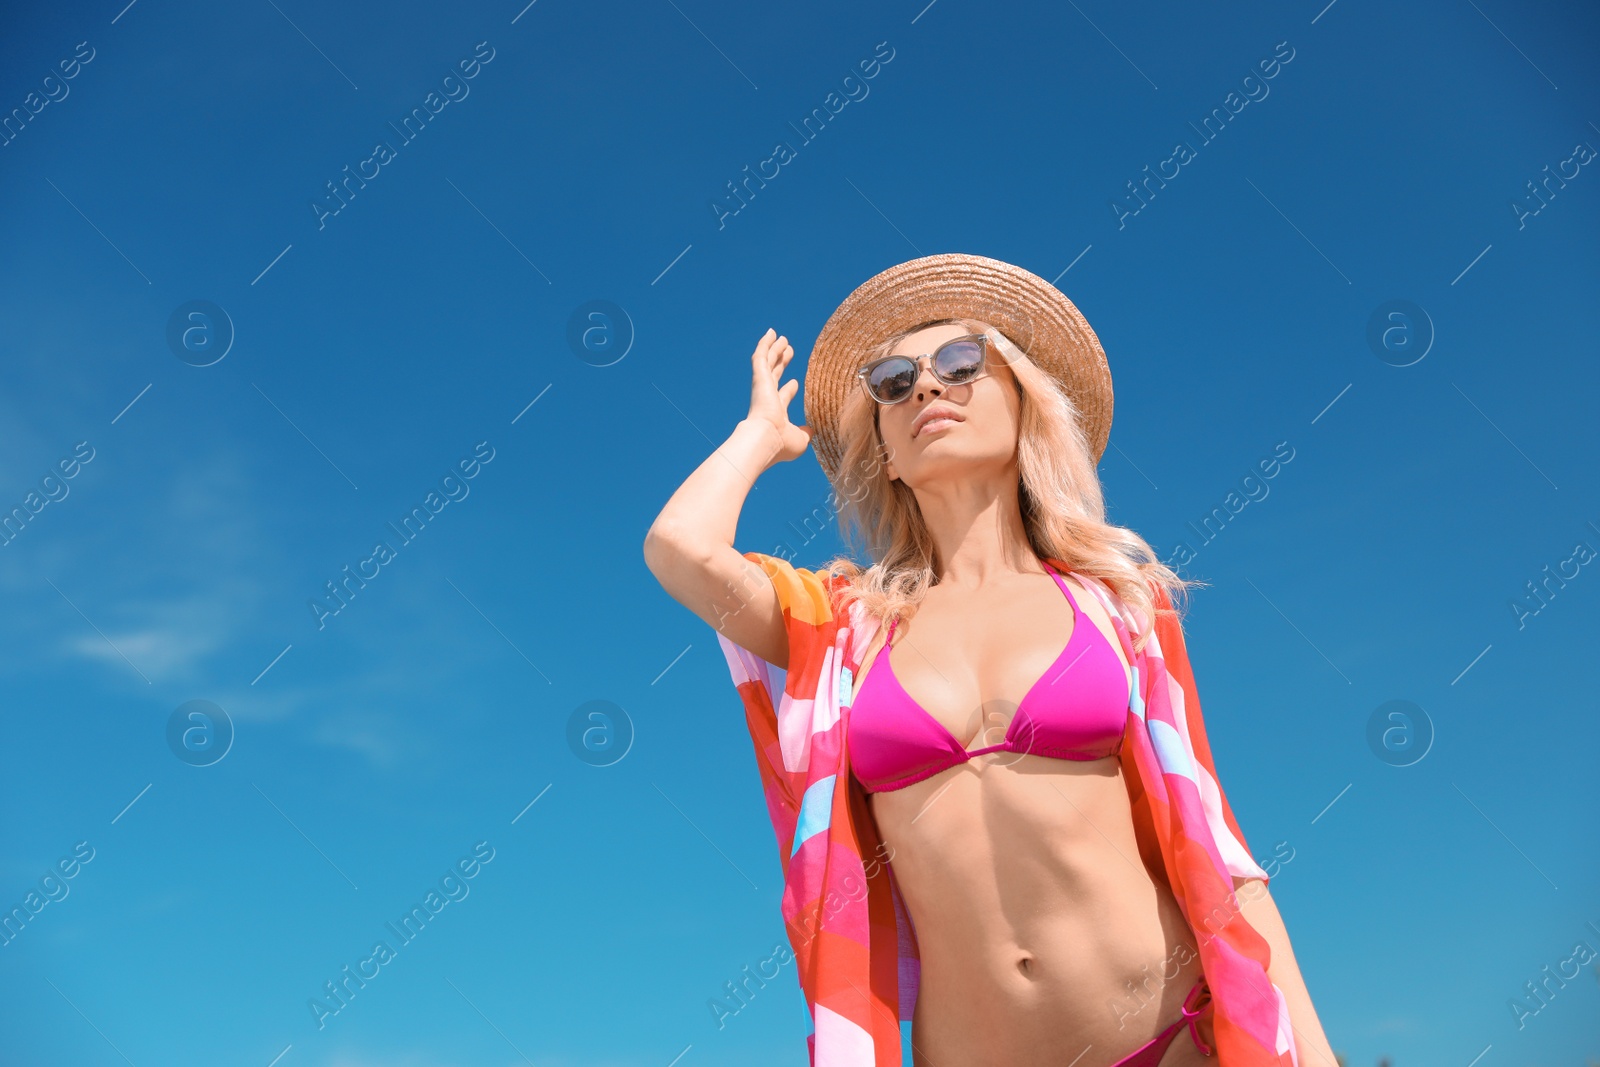 Photo of Sexy young woman in stylish bikini and cover up with accessories against blue sky on sunny day, low angle view. Space for text